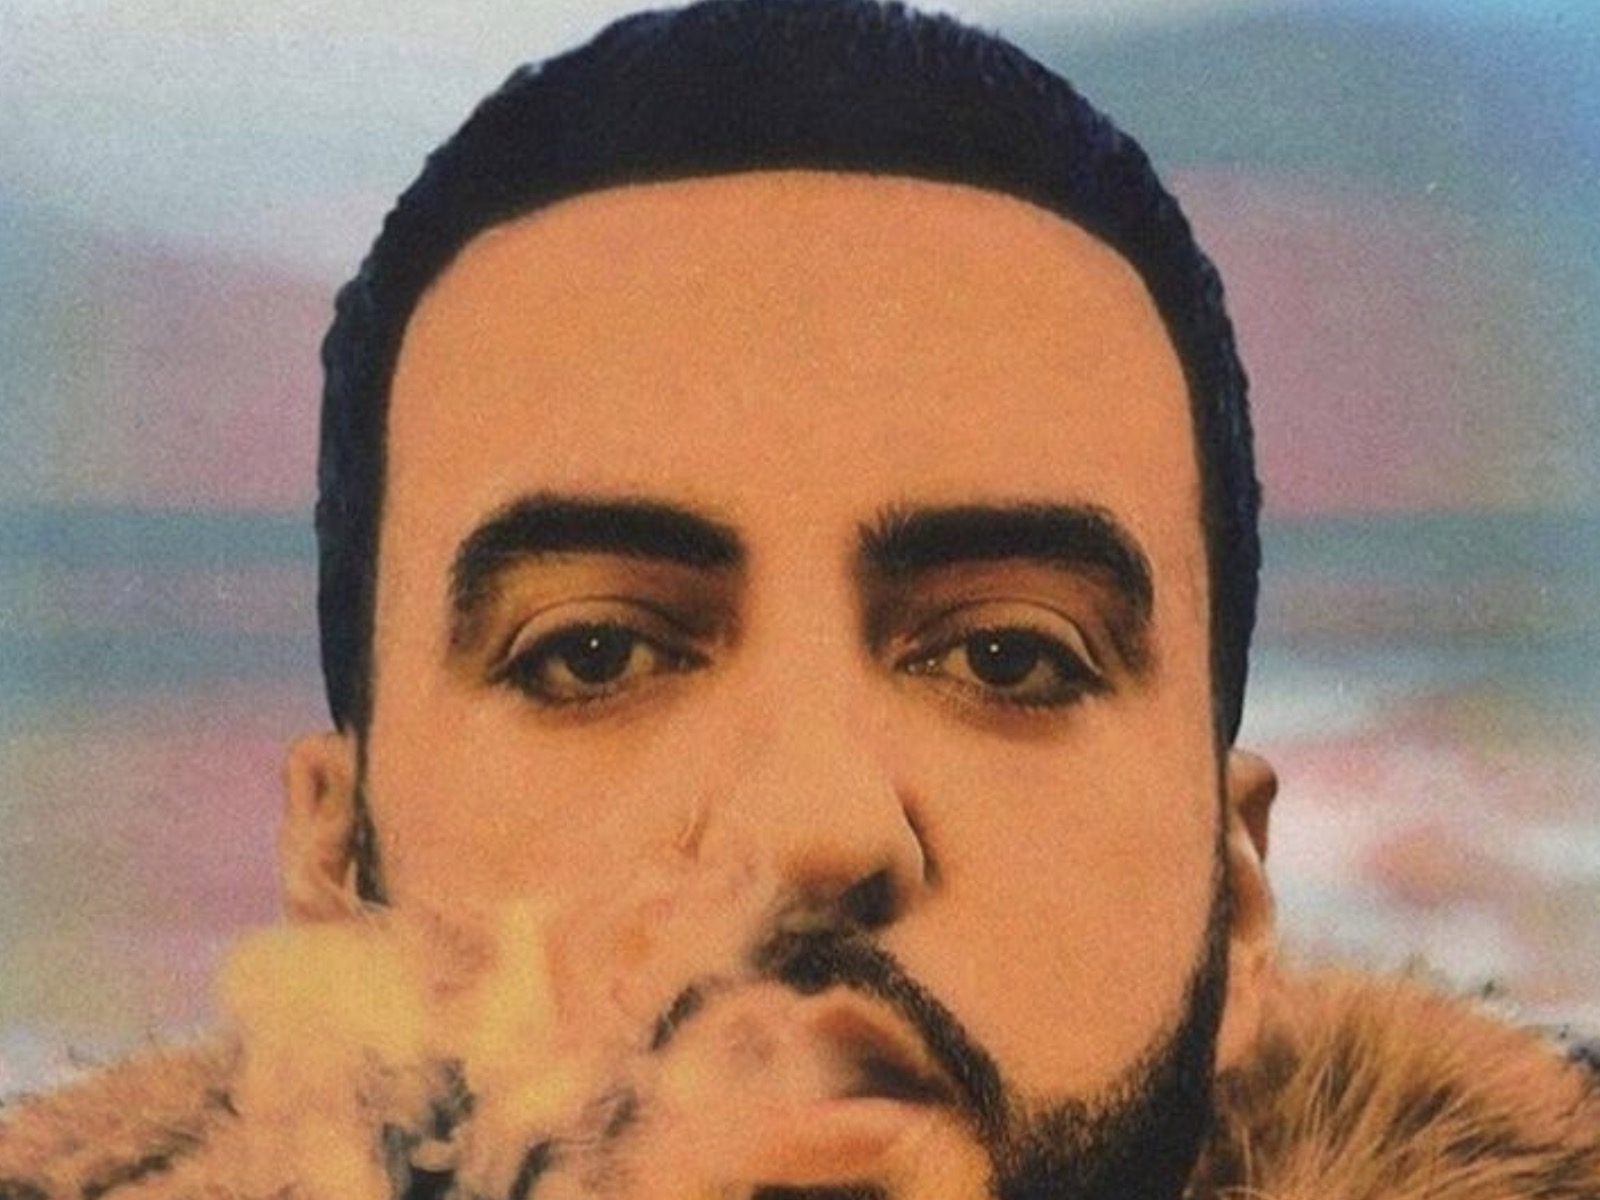 French montana JUNGLE RULES cover art